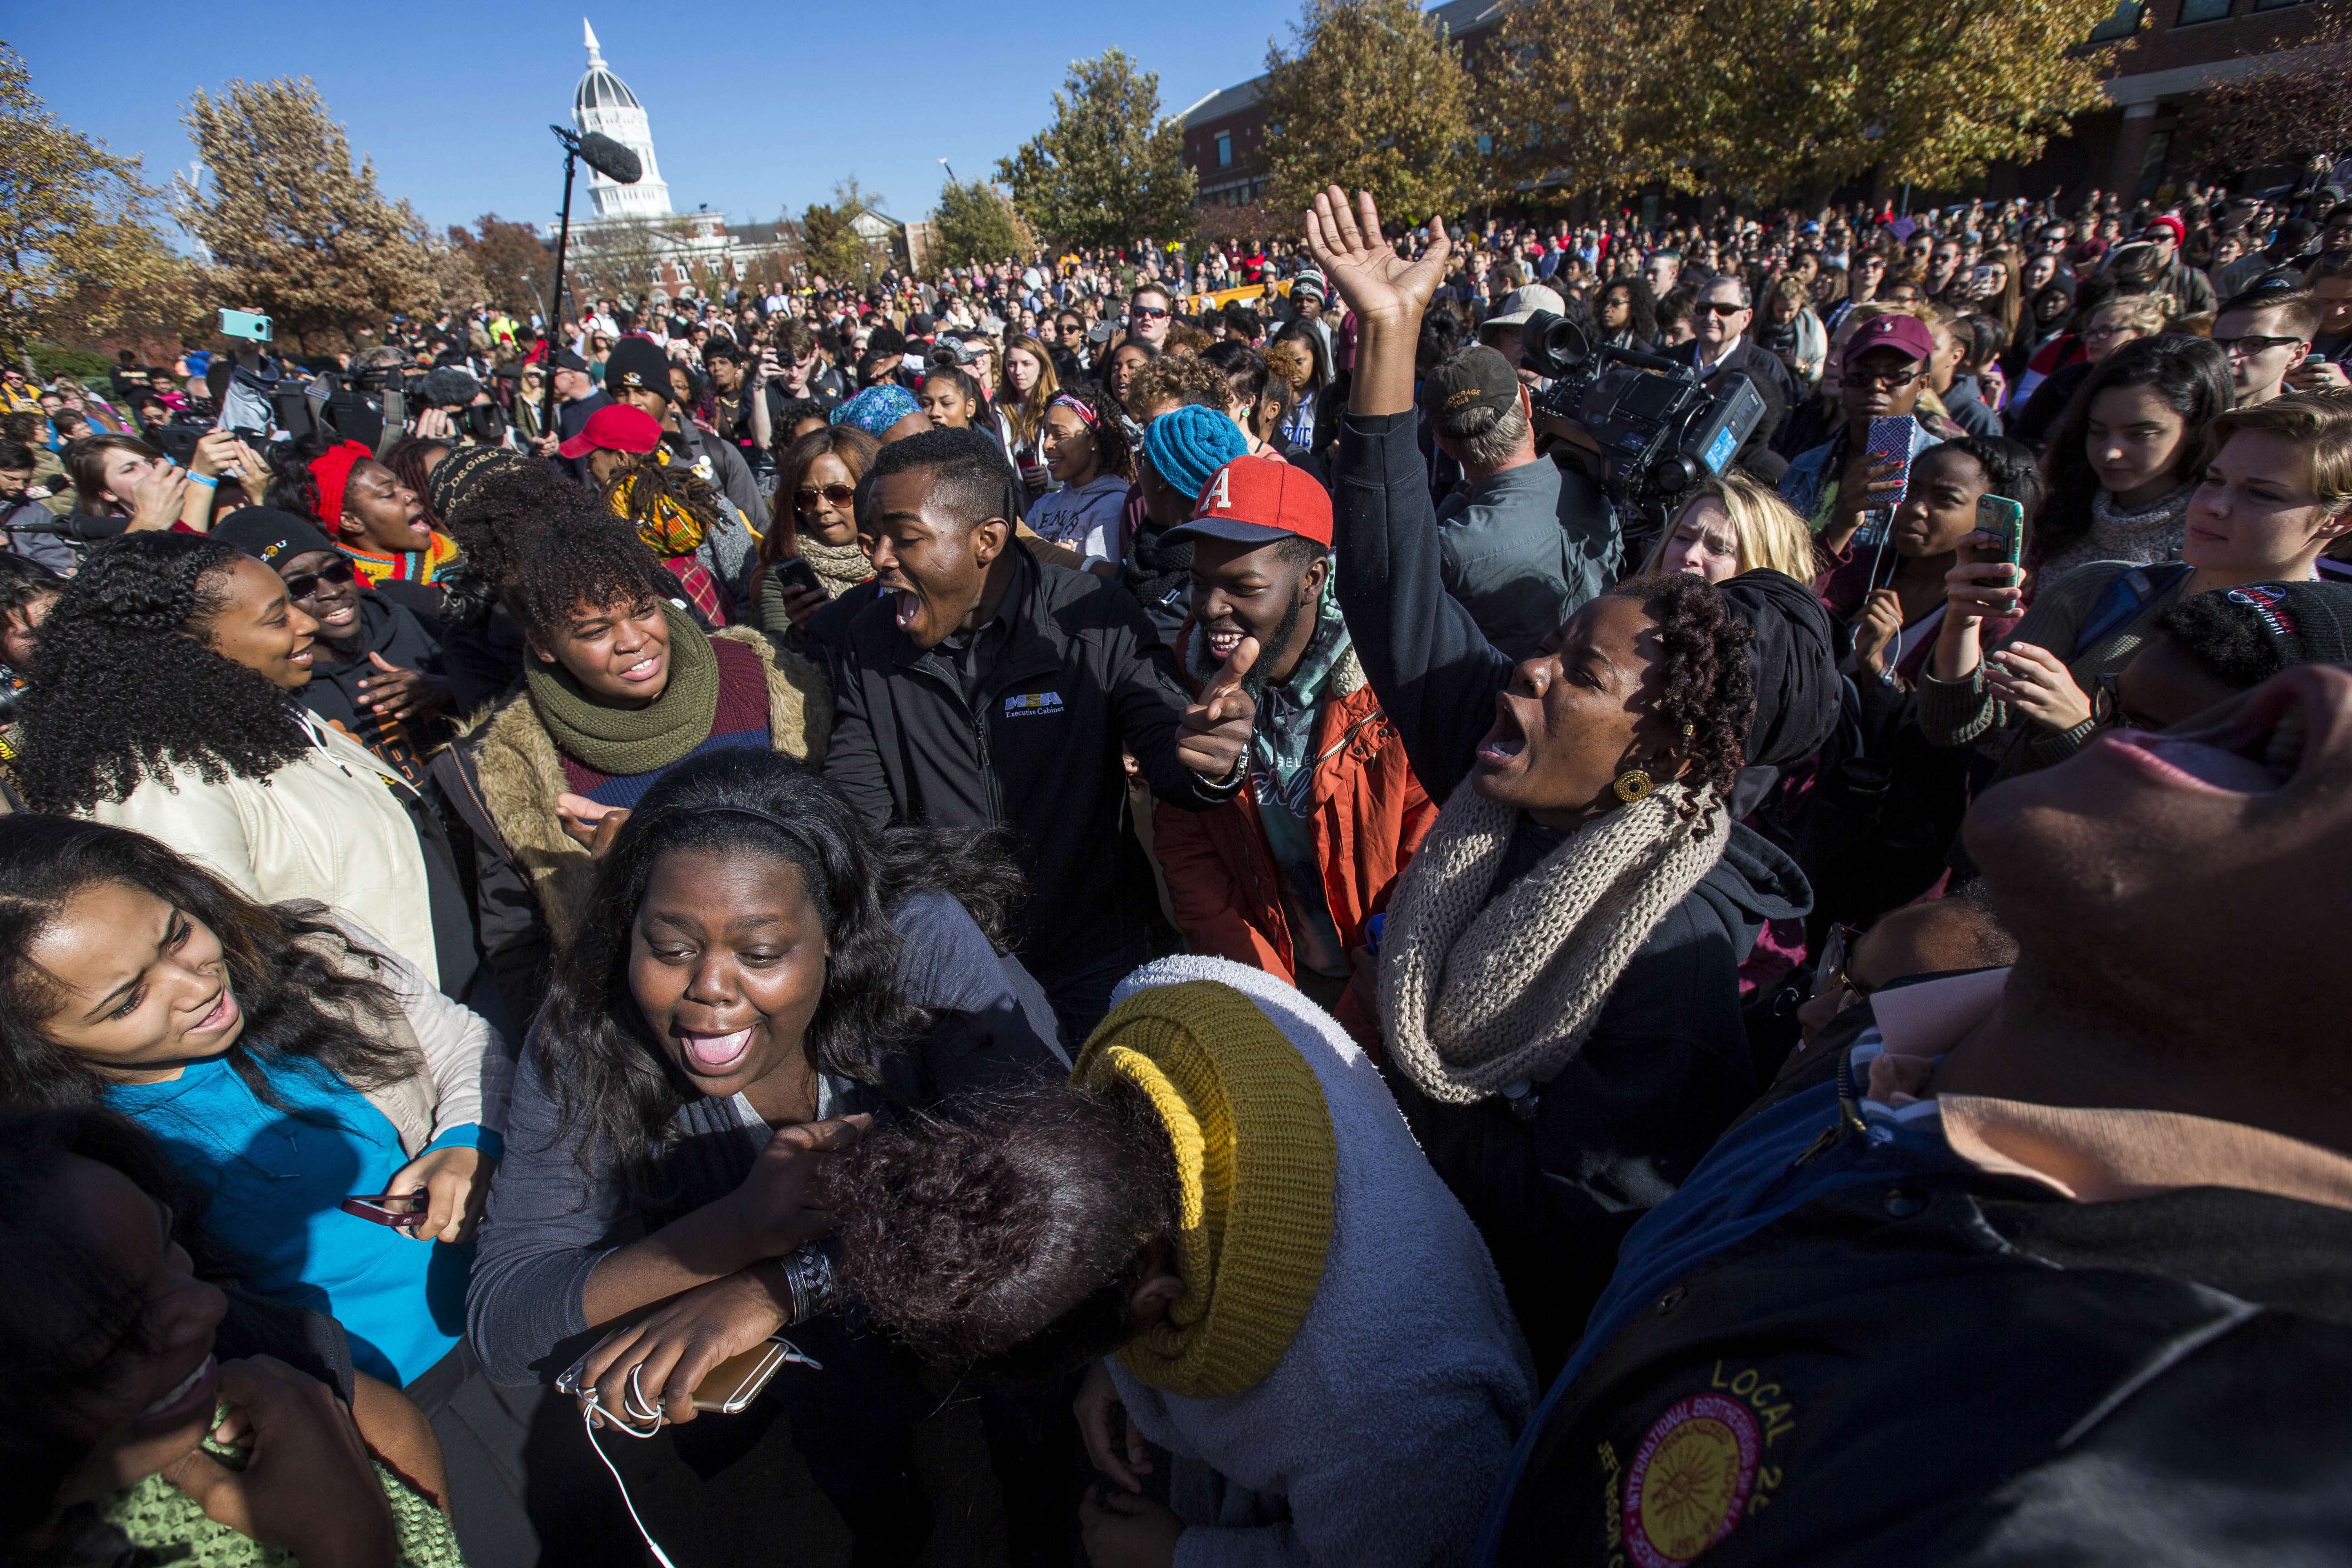 University Of Missouri President Resigns As Protests Grow Over Racism